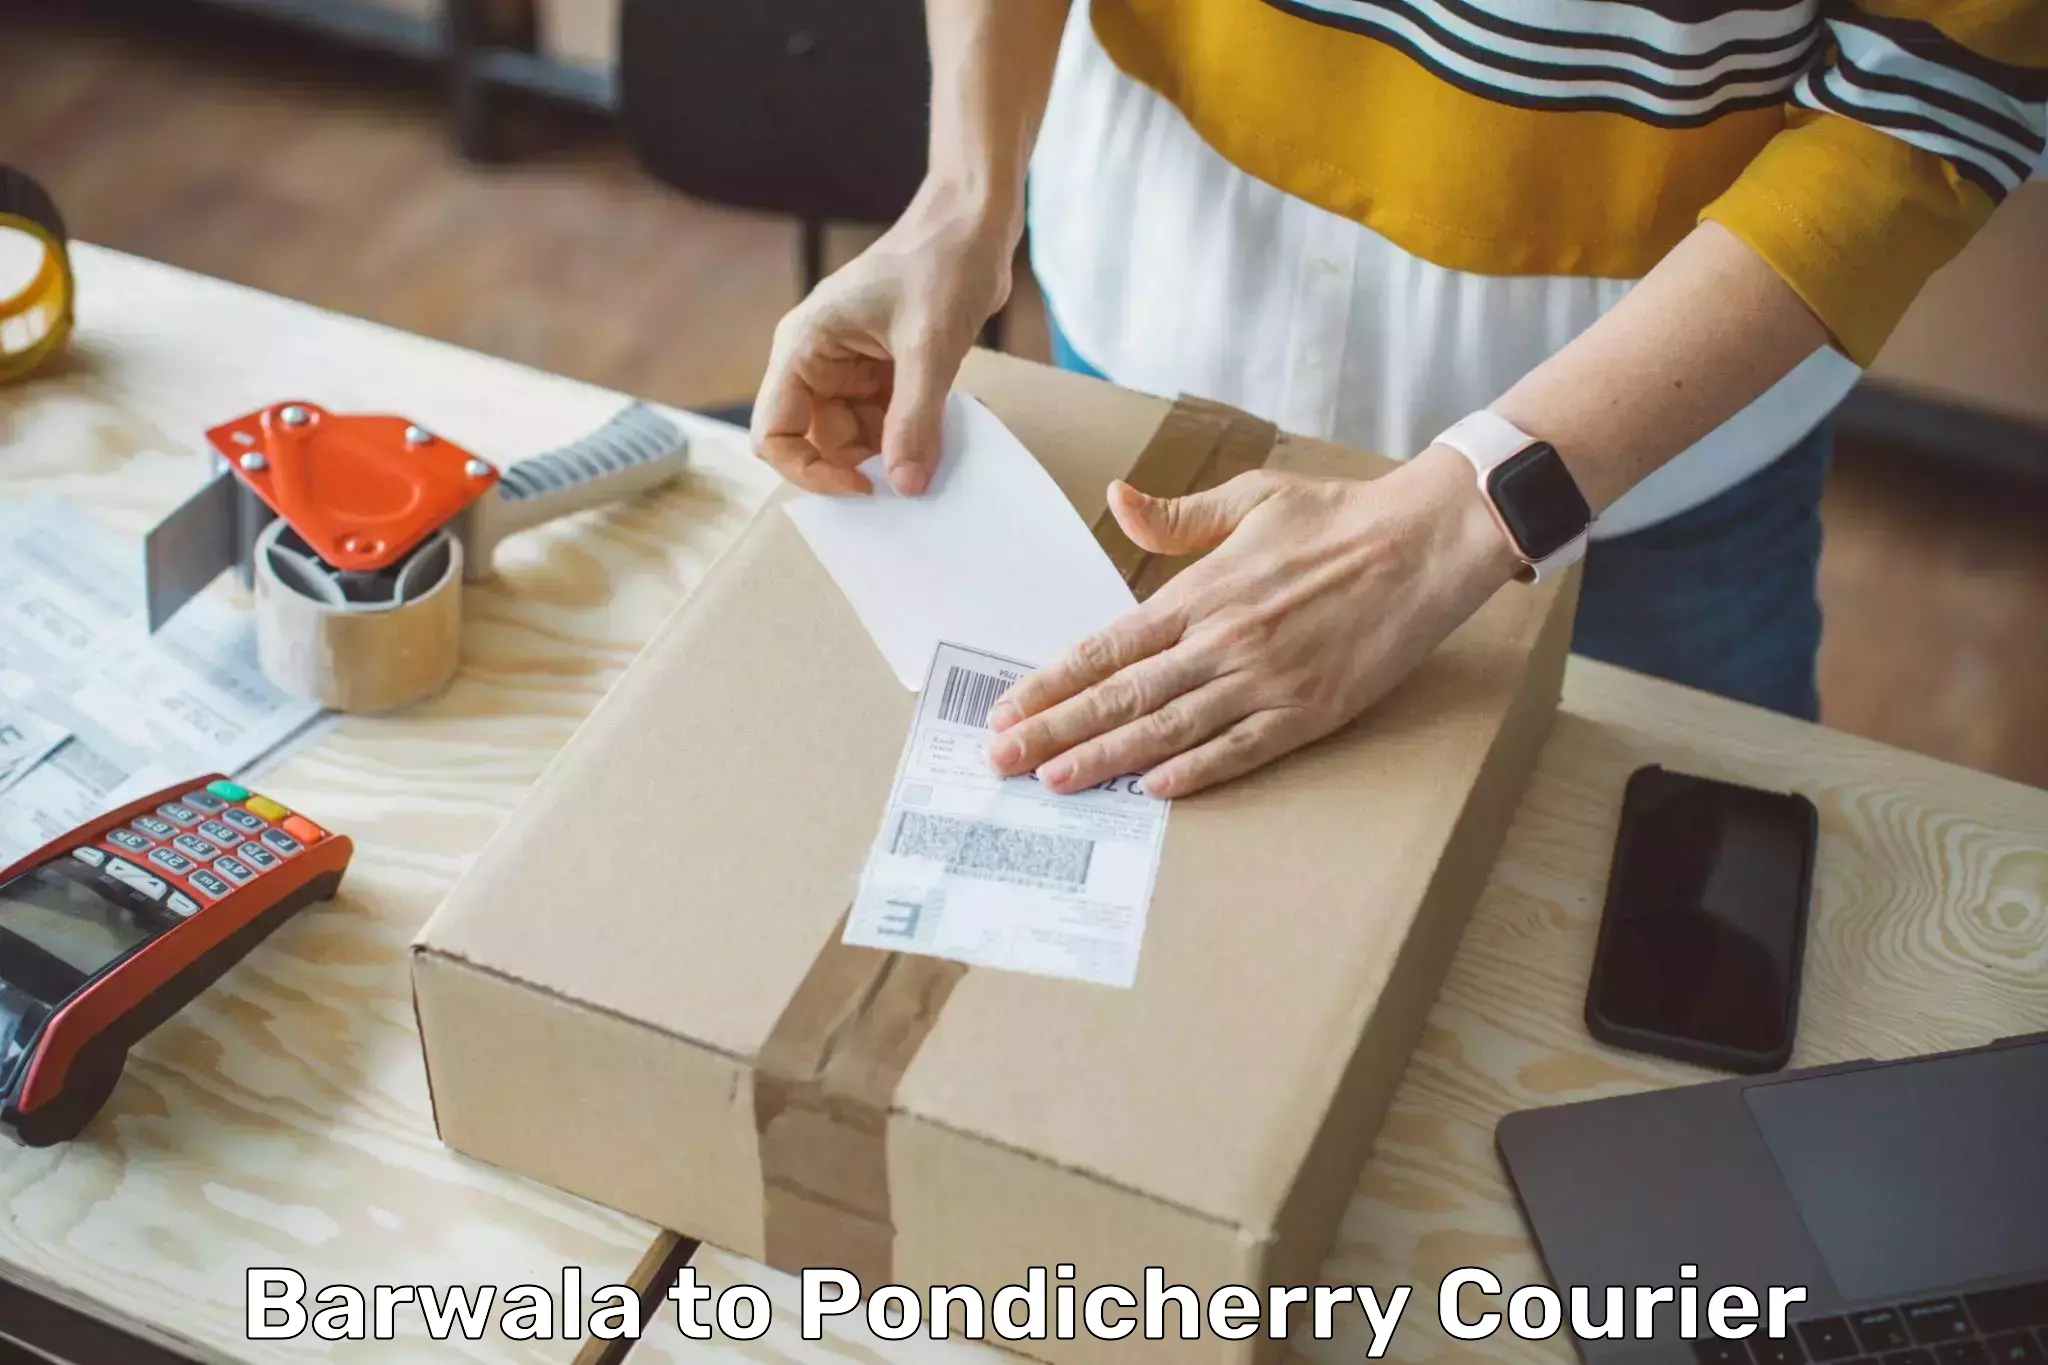 Global courier networks Barwala to Pondicherry